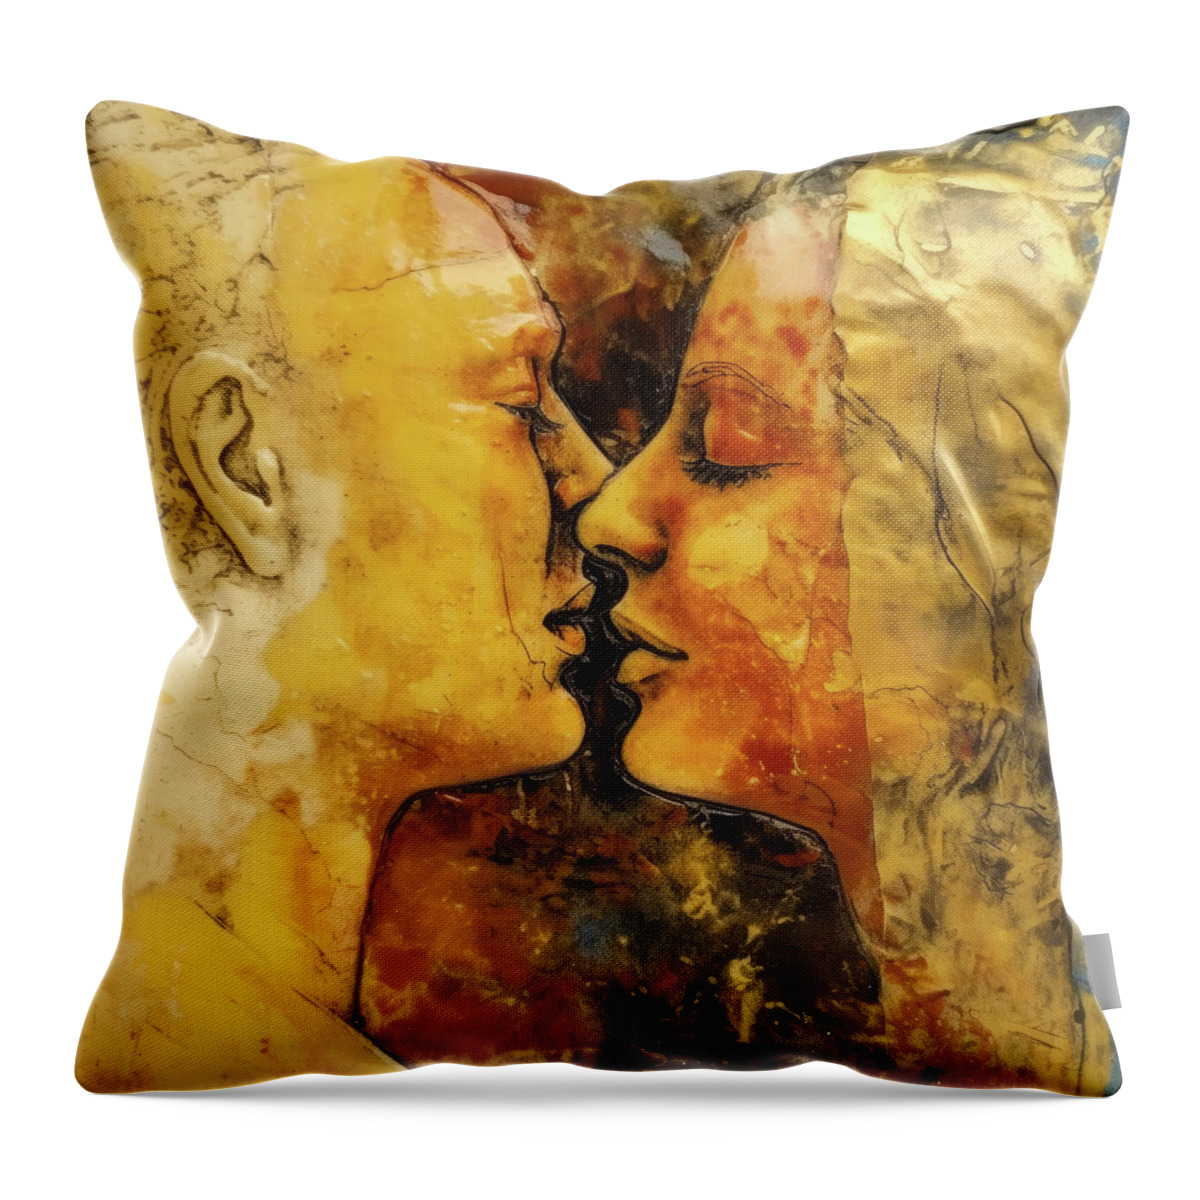 Lovers Throw Pillow featuring the digital art Two Lovers 12 Orange and Gold by Matthias Hauser